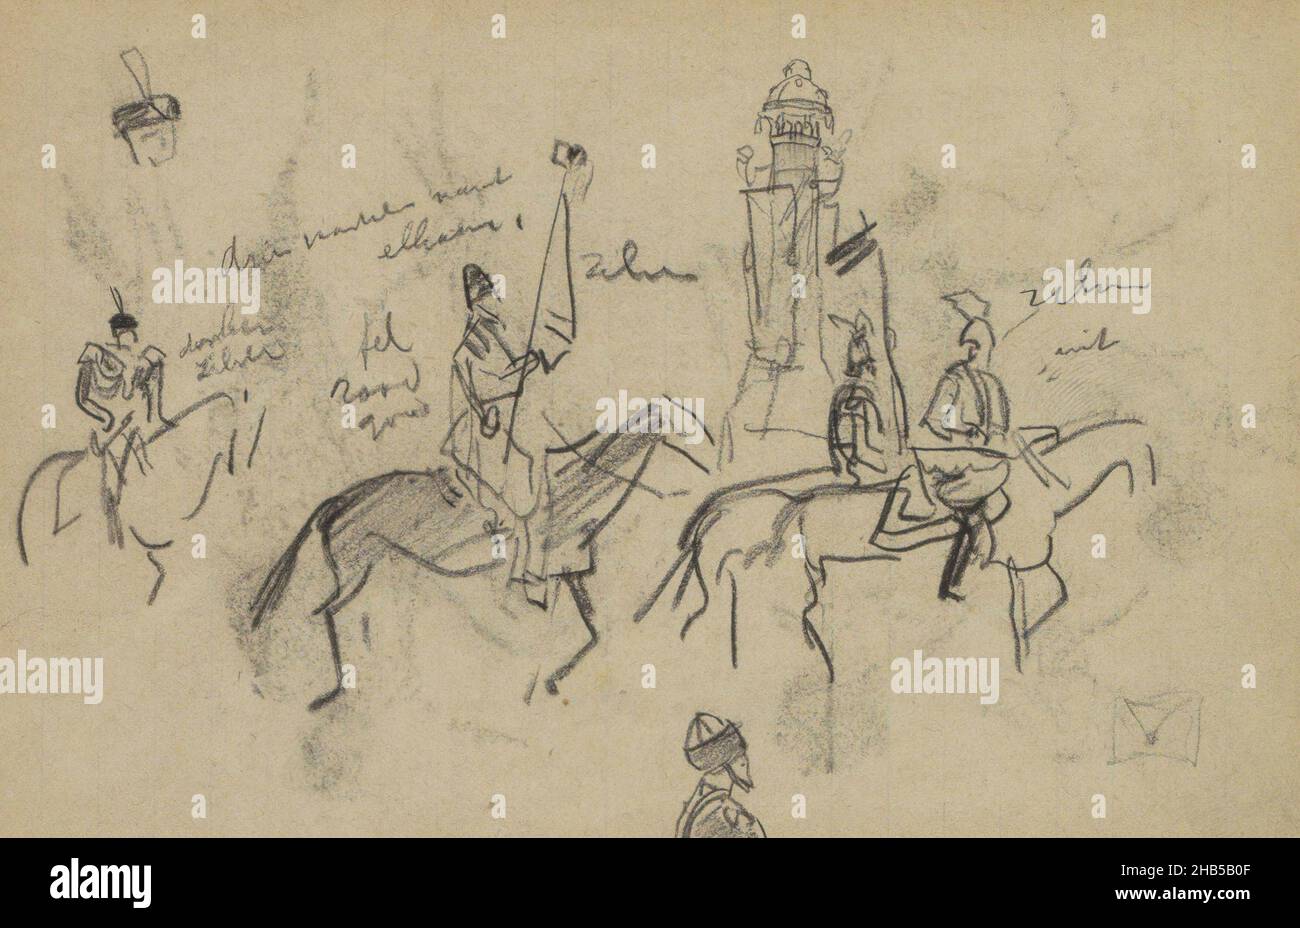 The military are part of the procession for the coronation of Tsar Nicholas II. In the background is a tower, probably one of the towers of the Kremlin. Page 64 from a sketchbook with 50 pages, Parade of soldiers on horseback with a banner., draughtsman: Marius Bauer, Moskou, 1896, Marius Bauer, 1896 Stock Photo